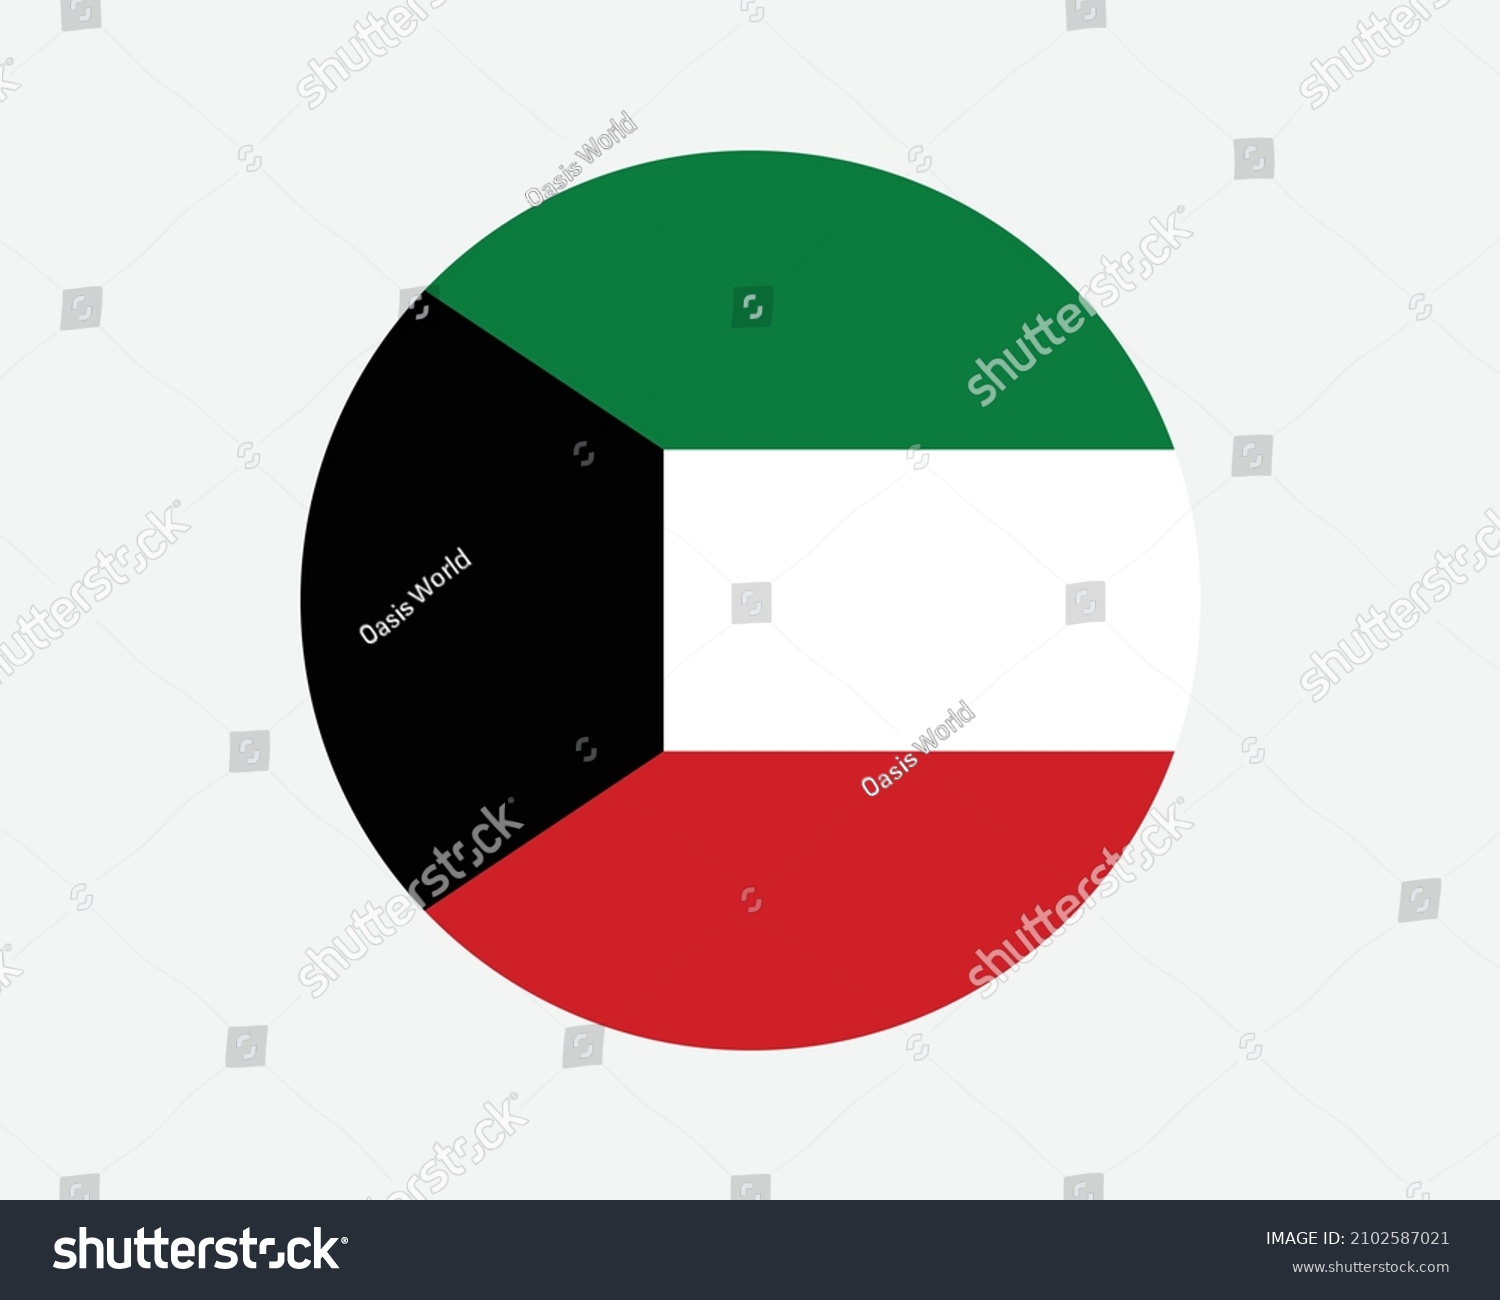 SVG of Kuwait Round Country Flag. Kuwaiti Circle National Flag. State of Kuwait Circular Shape Button Banner. EPS Vector Illustration. svg